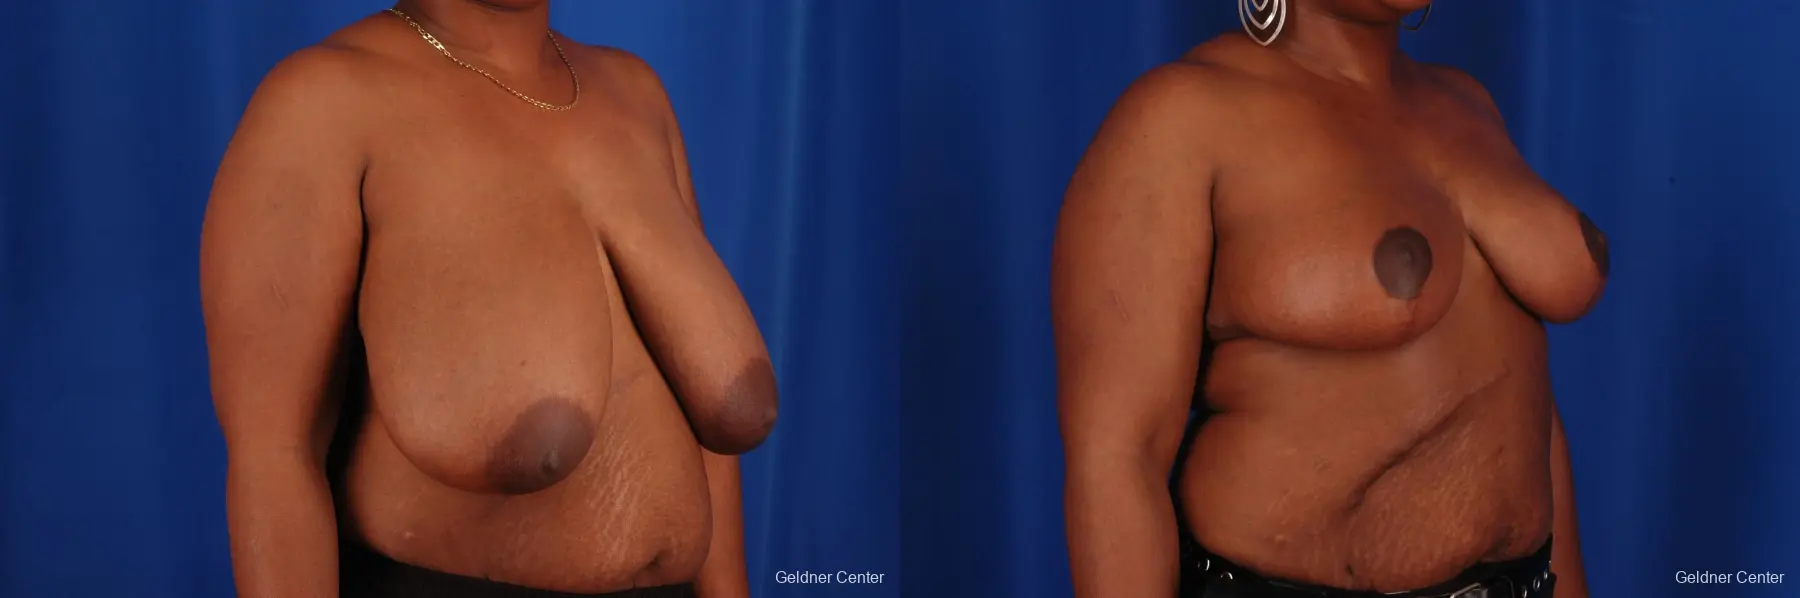 Breast Reduction Hinsdale, Chicago 2334 - Before and After 3